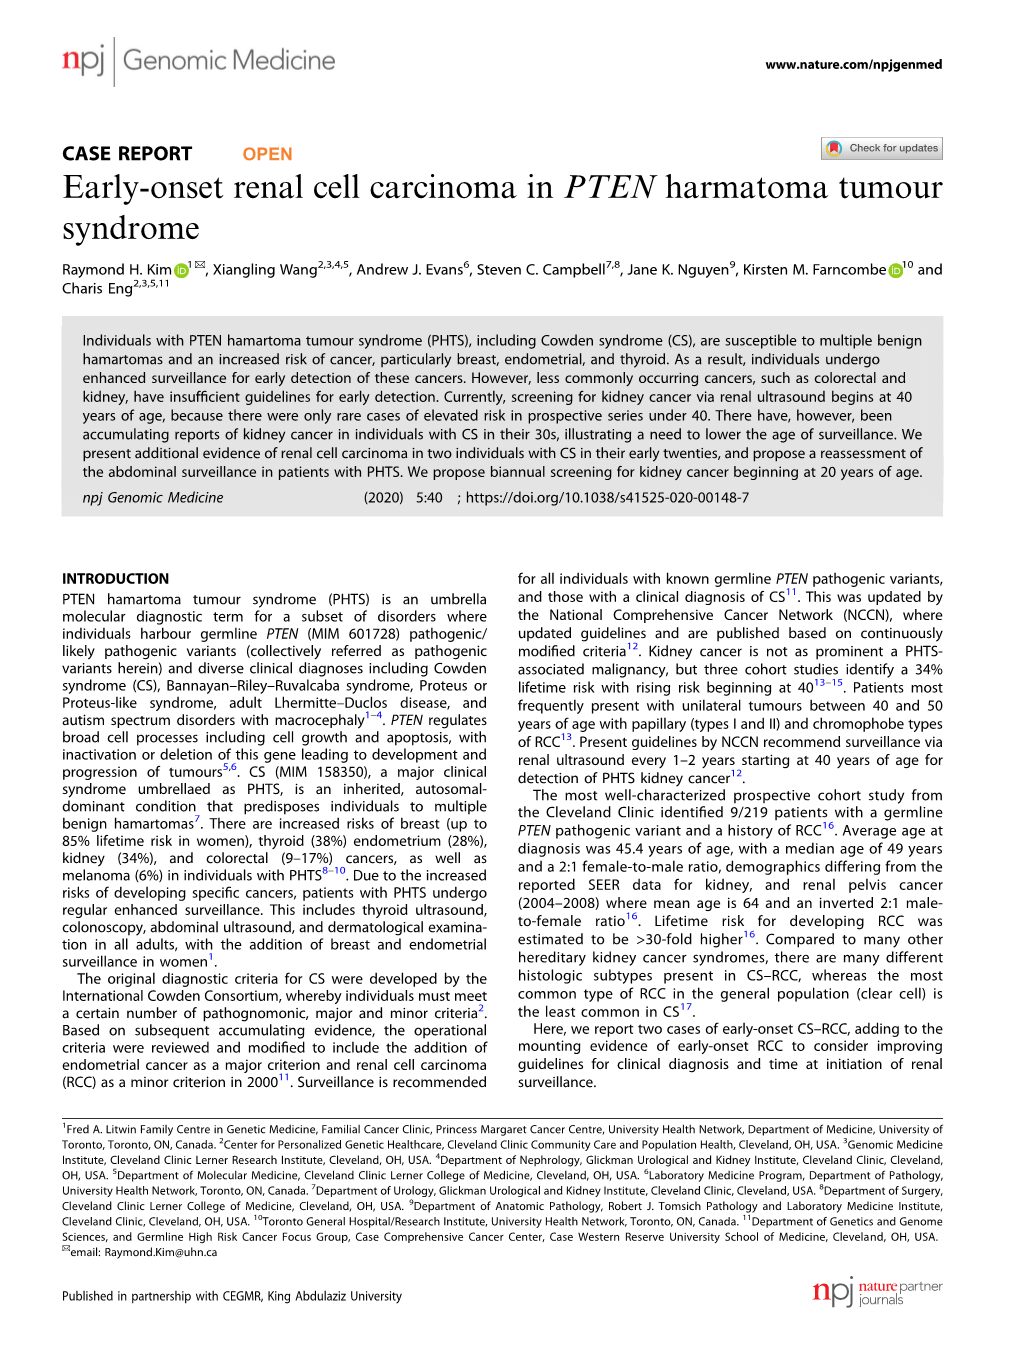 Early-Onset Renal Cell Carcinoma in PTEN Harmatoma Tumour Syndrome ✉ Raymond H